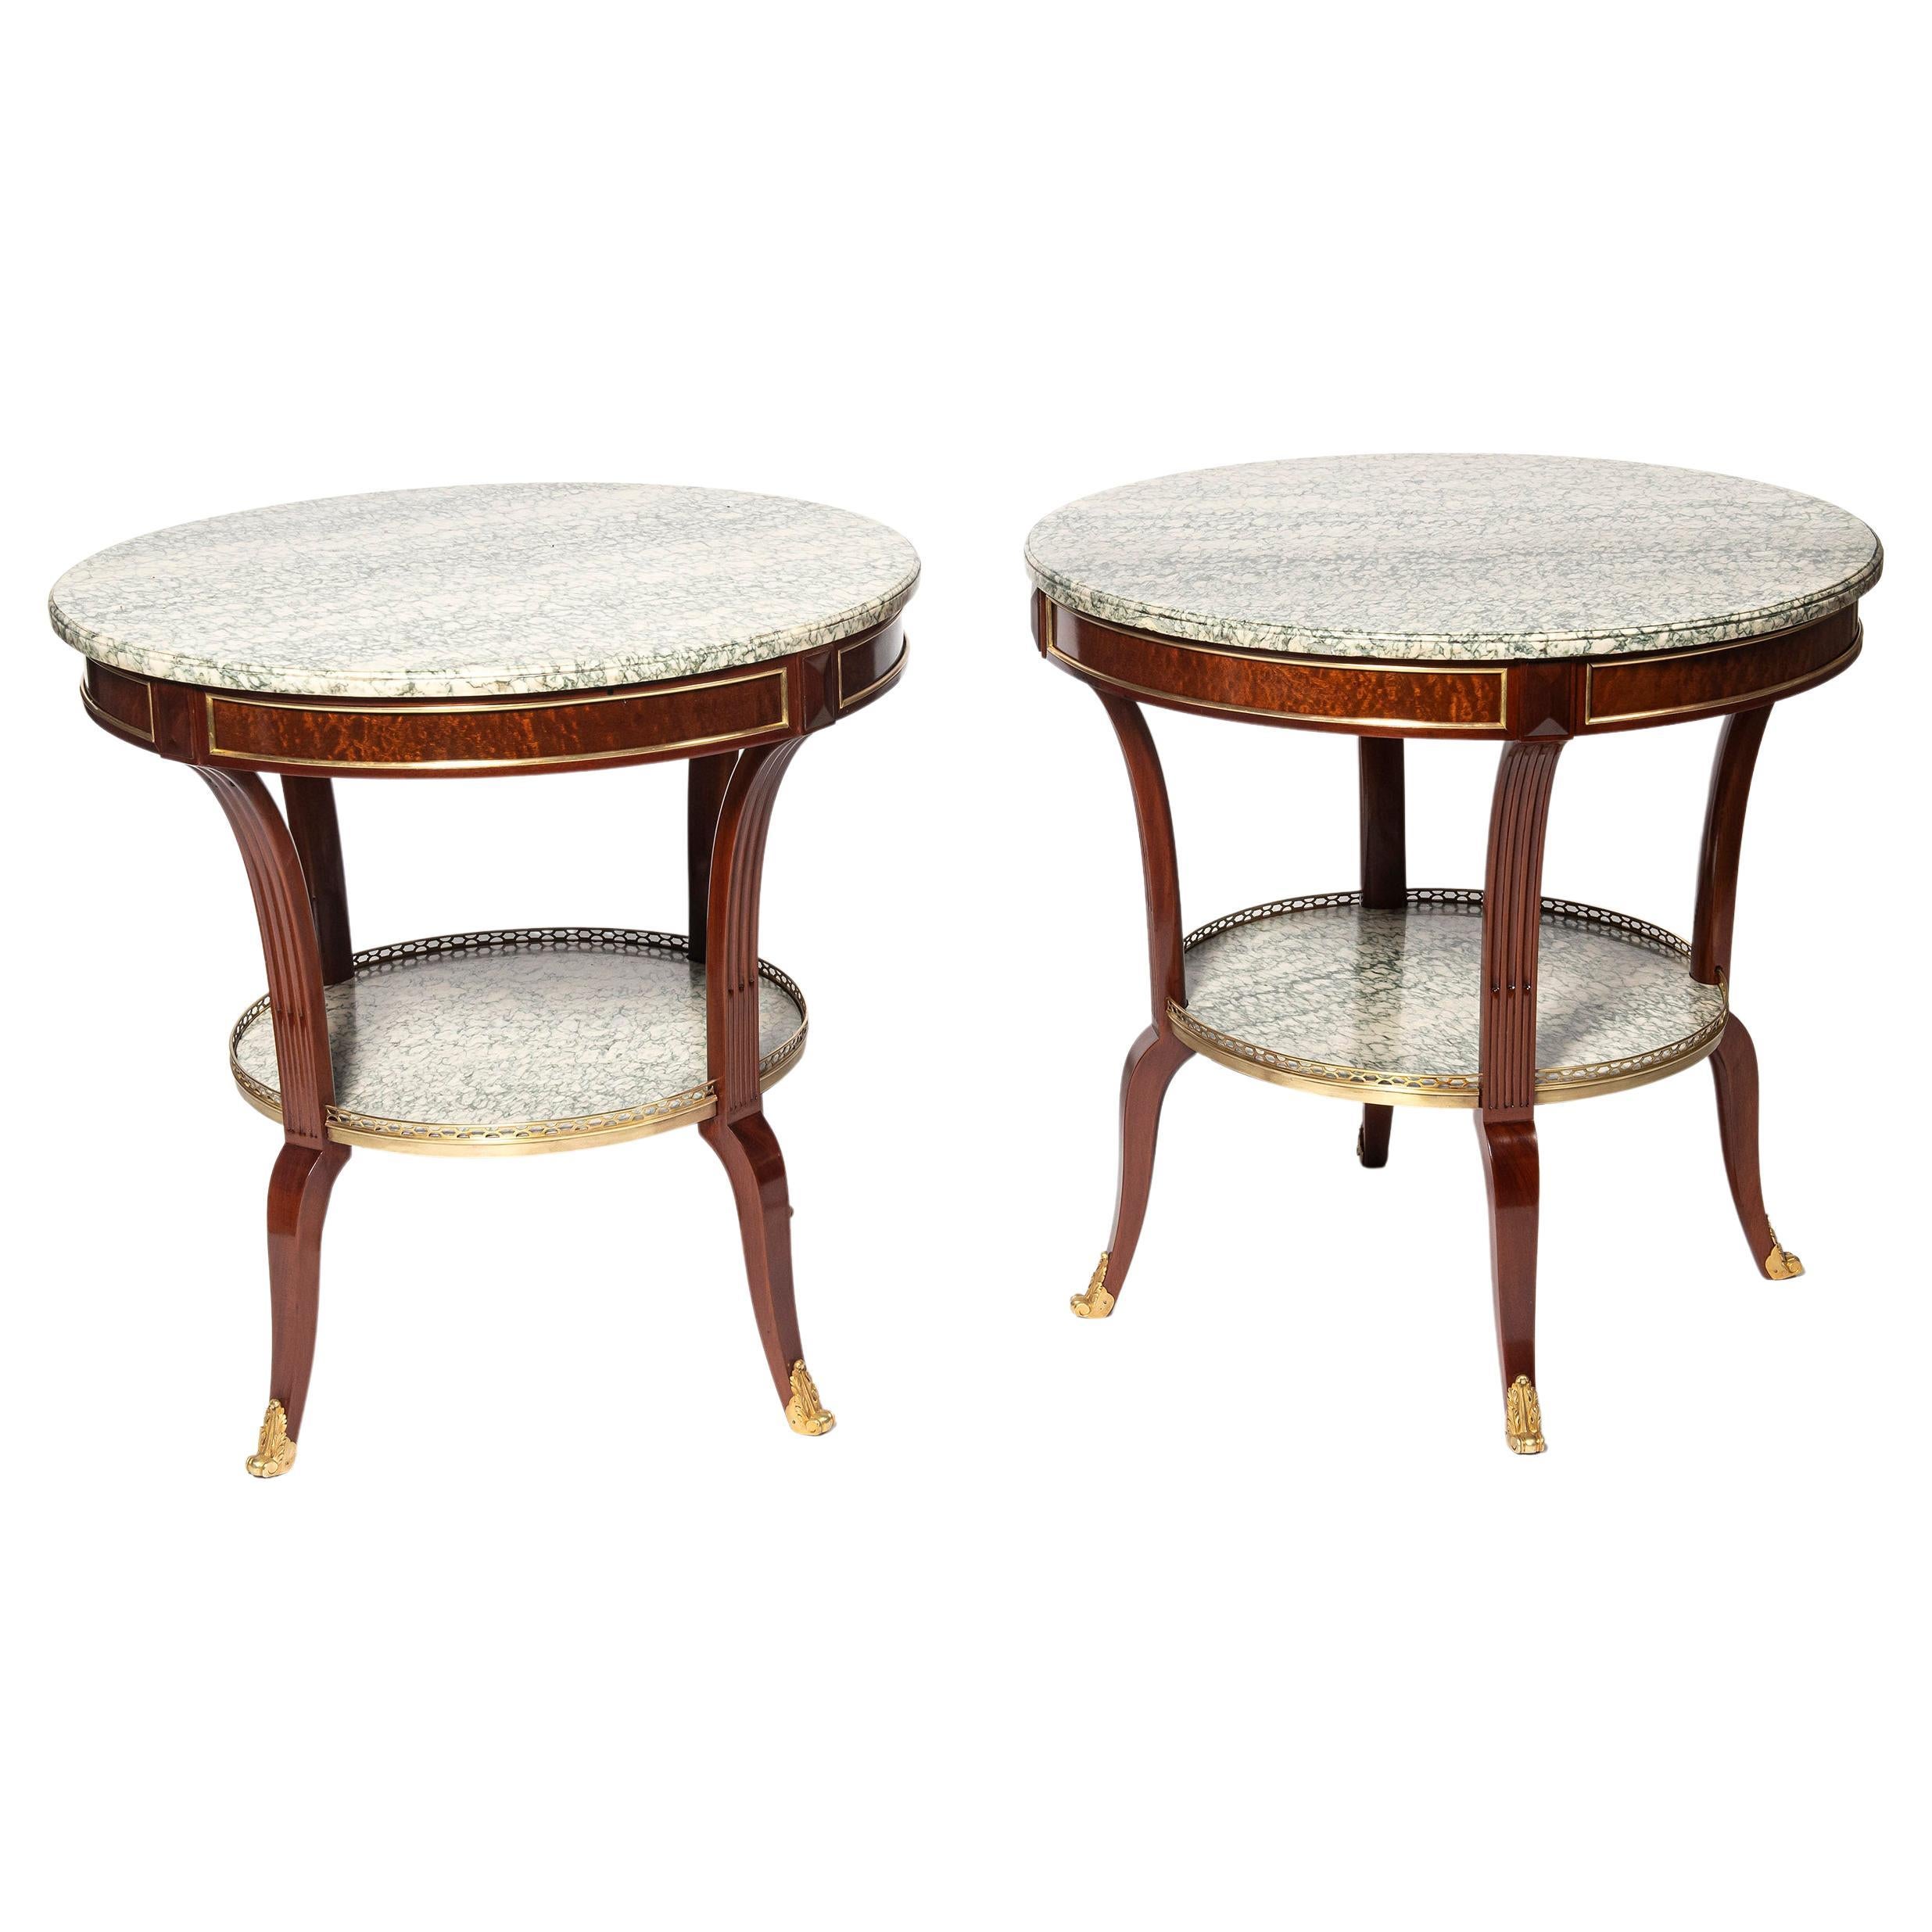 Pair of Wood, Marble and Bronze Side Tables, France, Late 19th Century For Sale